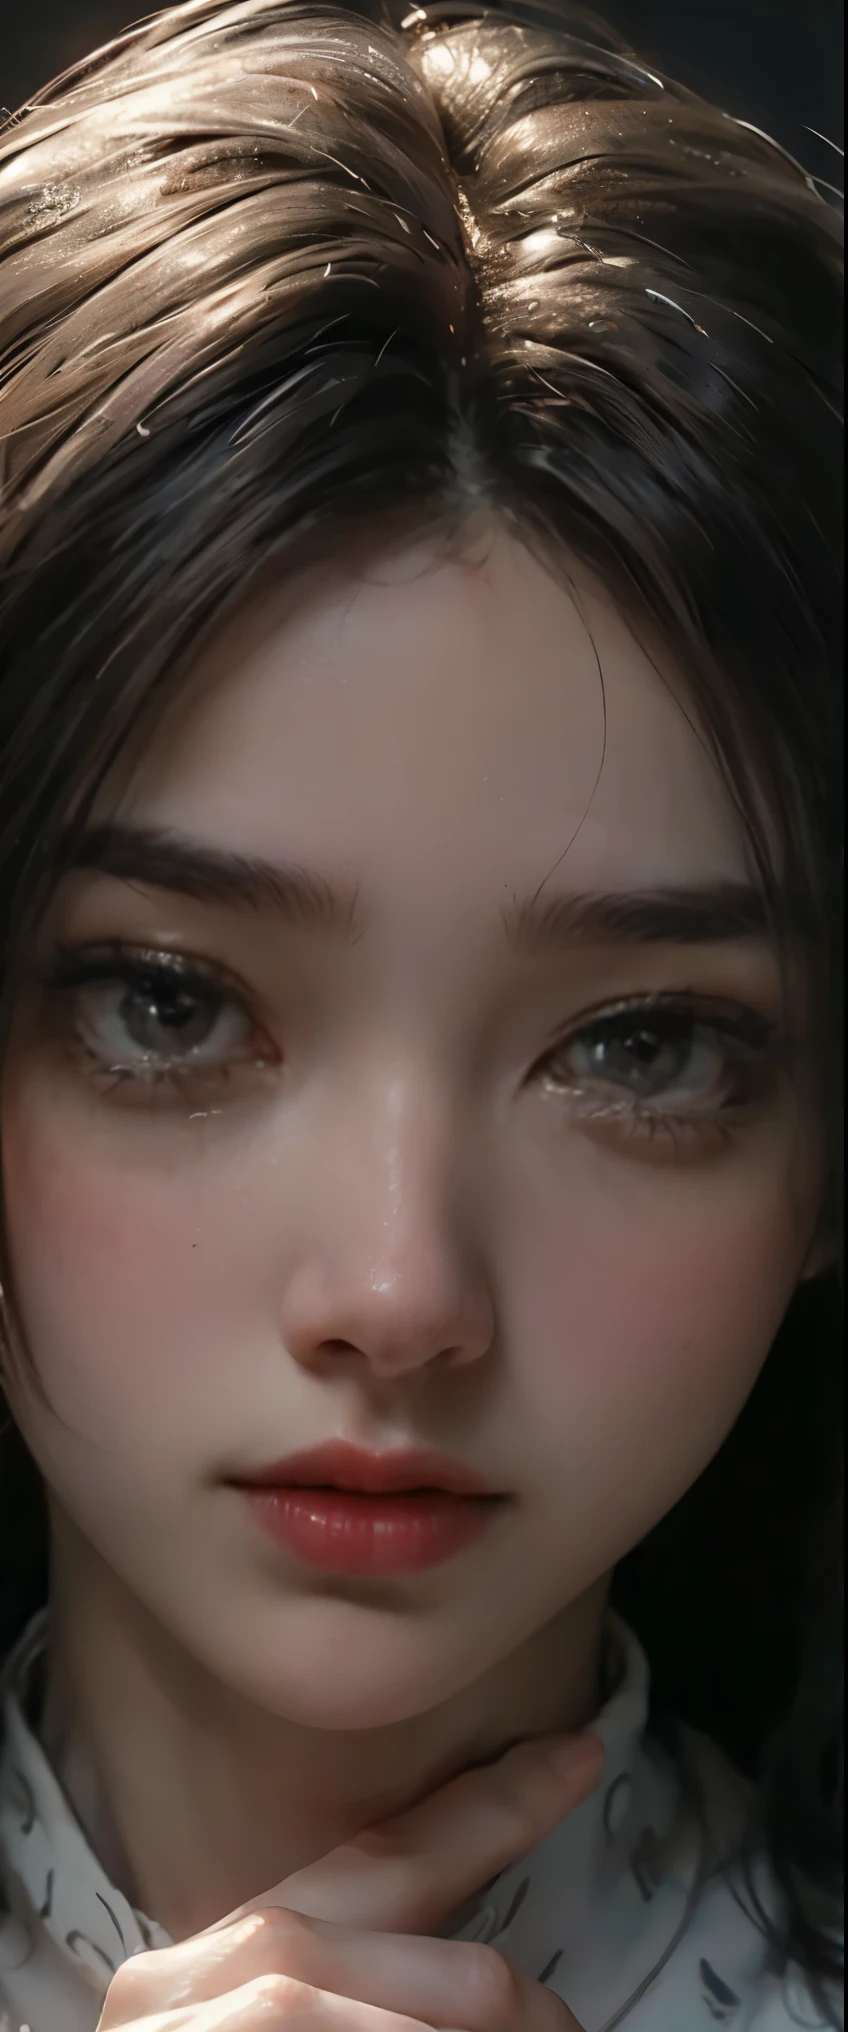 ((masterpiece, highest quality, Highest image quality, High resolution, photorealistic, Raw photo, 8K)), Young woman wearing ring crying, crying woman, tears streaming down face, tears dripping from eyes, tears crying, crying person, single tear, tears, close up of face melting in anguish, tears on face, crying and weeping, tears, weeping drops, tears dripping from eyes, 